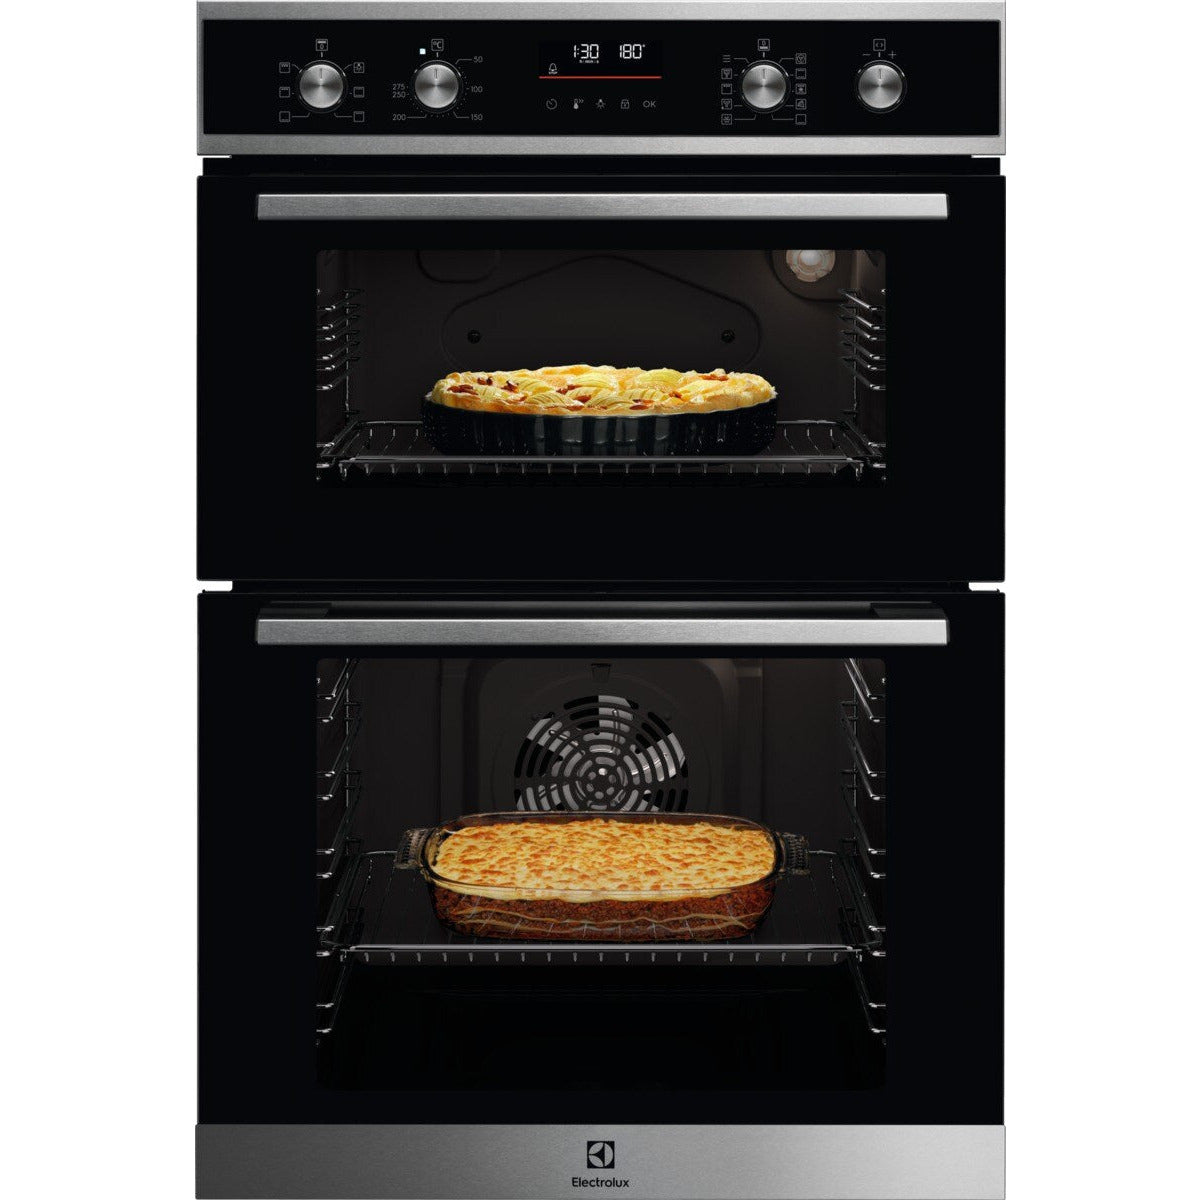 Electrolux 300 SurroundCook 61L Built-In Multifunction Electric Double Oven - Stainless Steel | EDFDC46X from Electrolux - DID Electrical